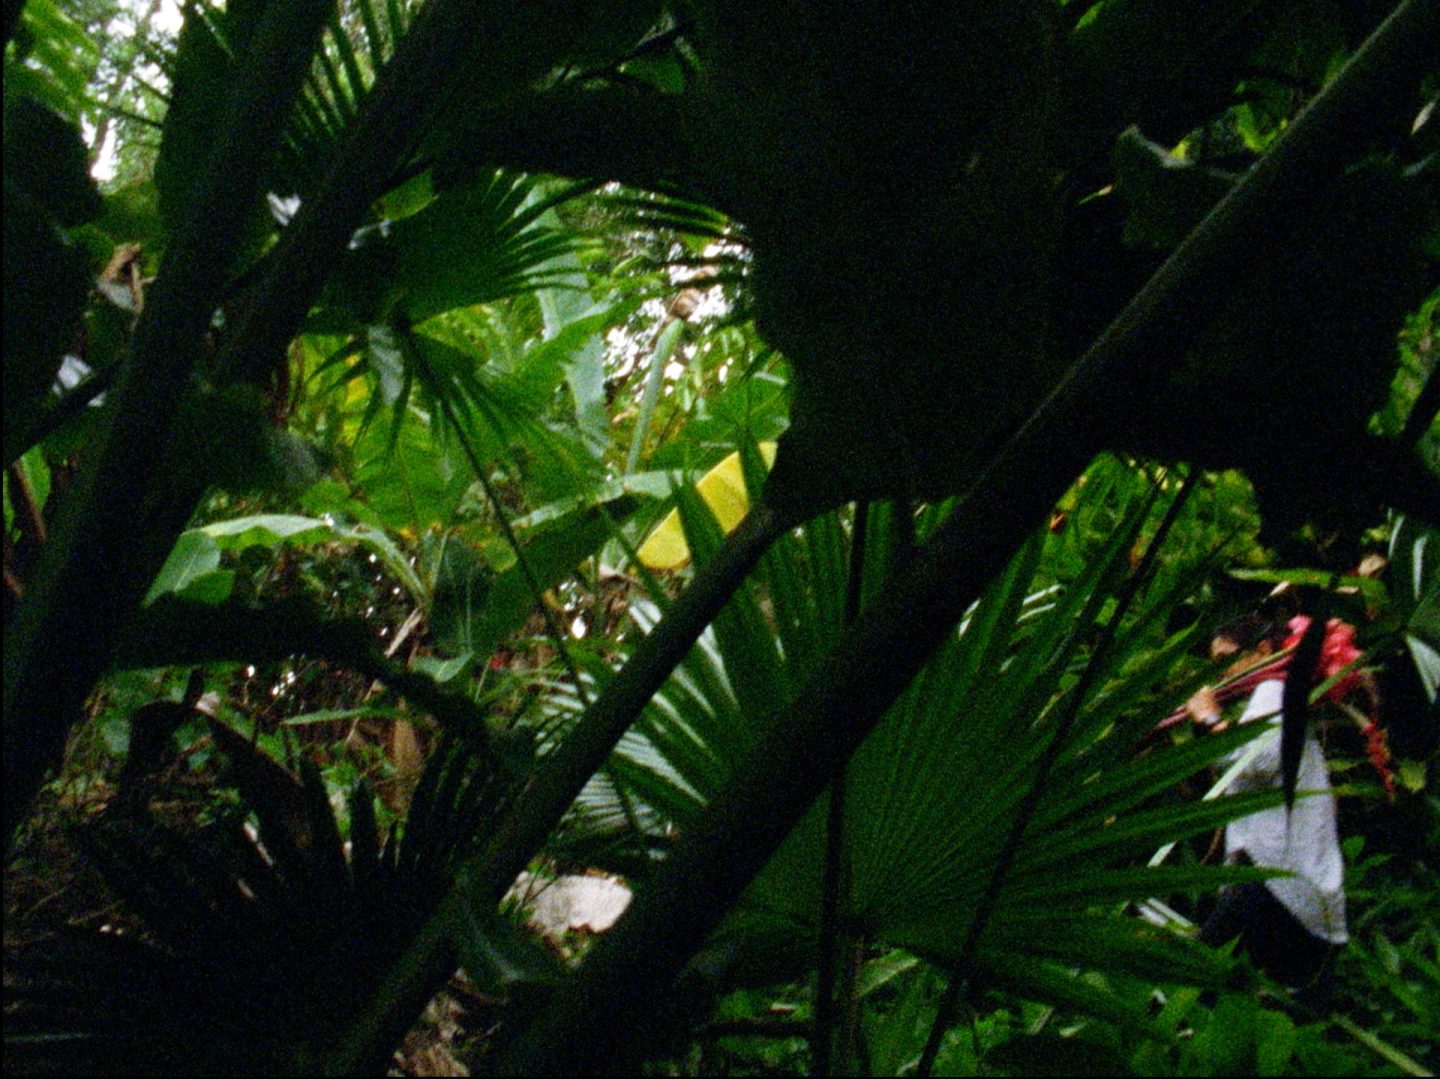 Green foliage with a person barely visible behind the leaves.